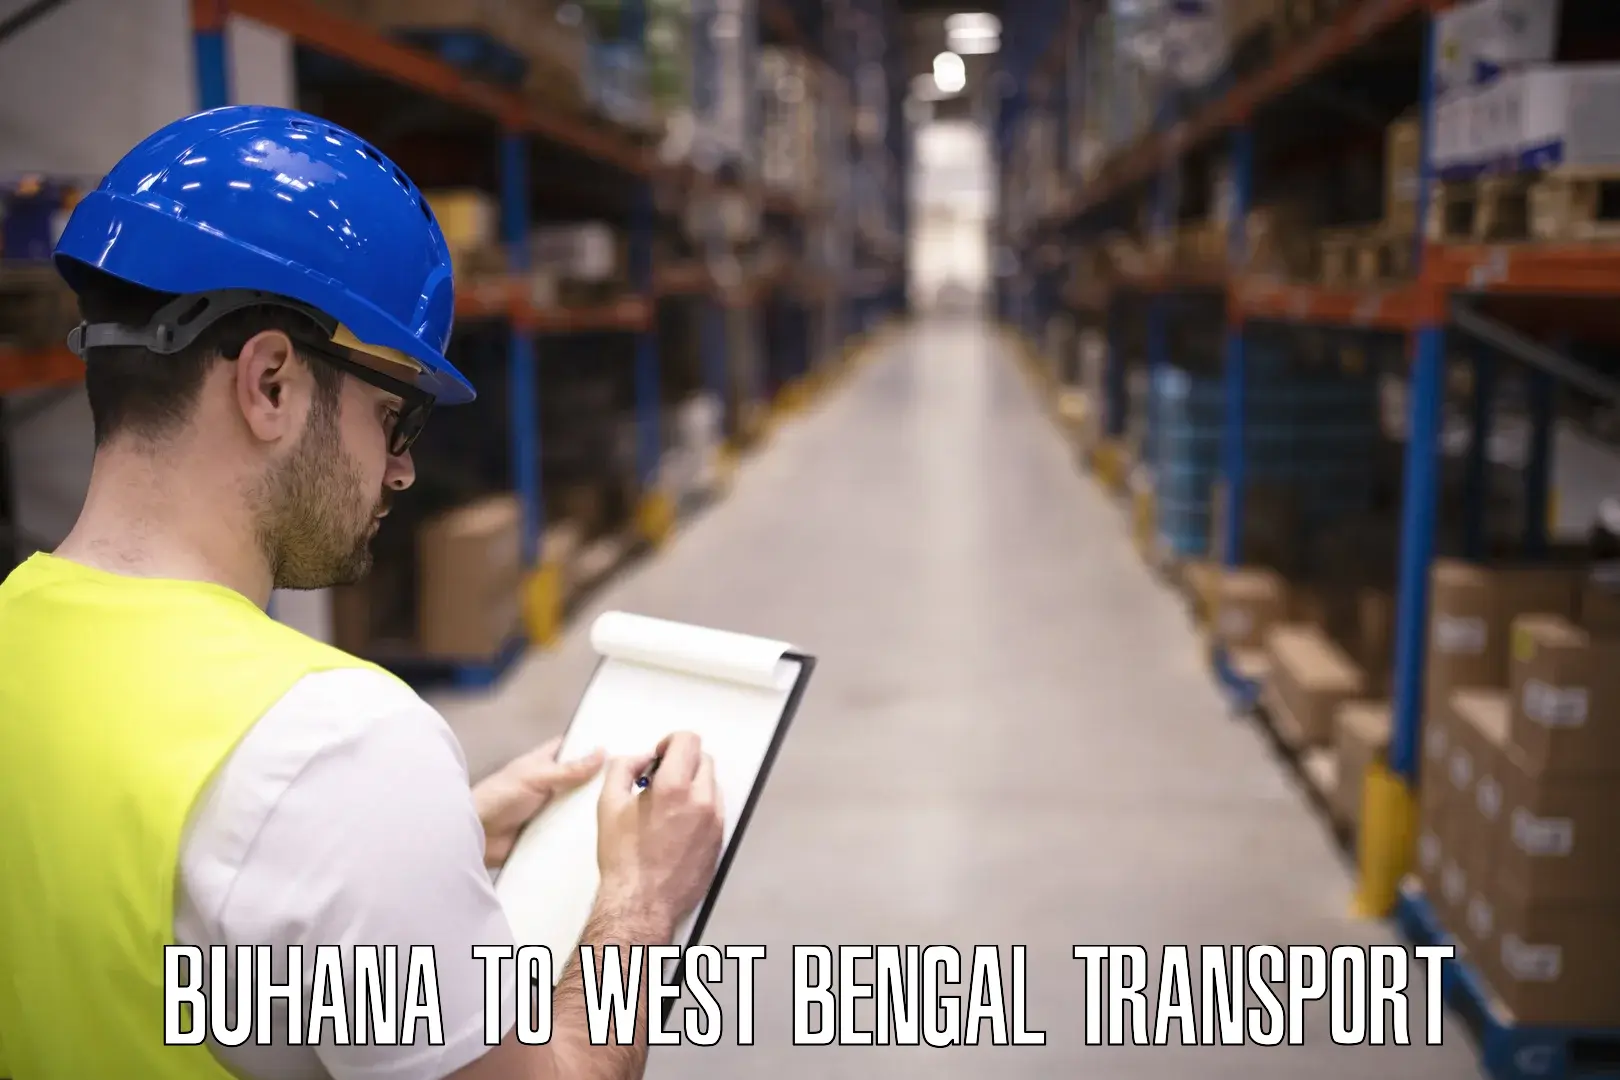 Commercial transport service Buhana to West Bengal